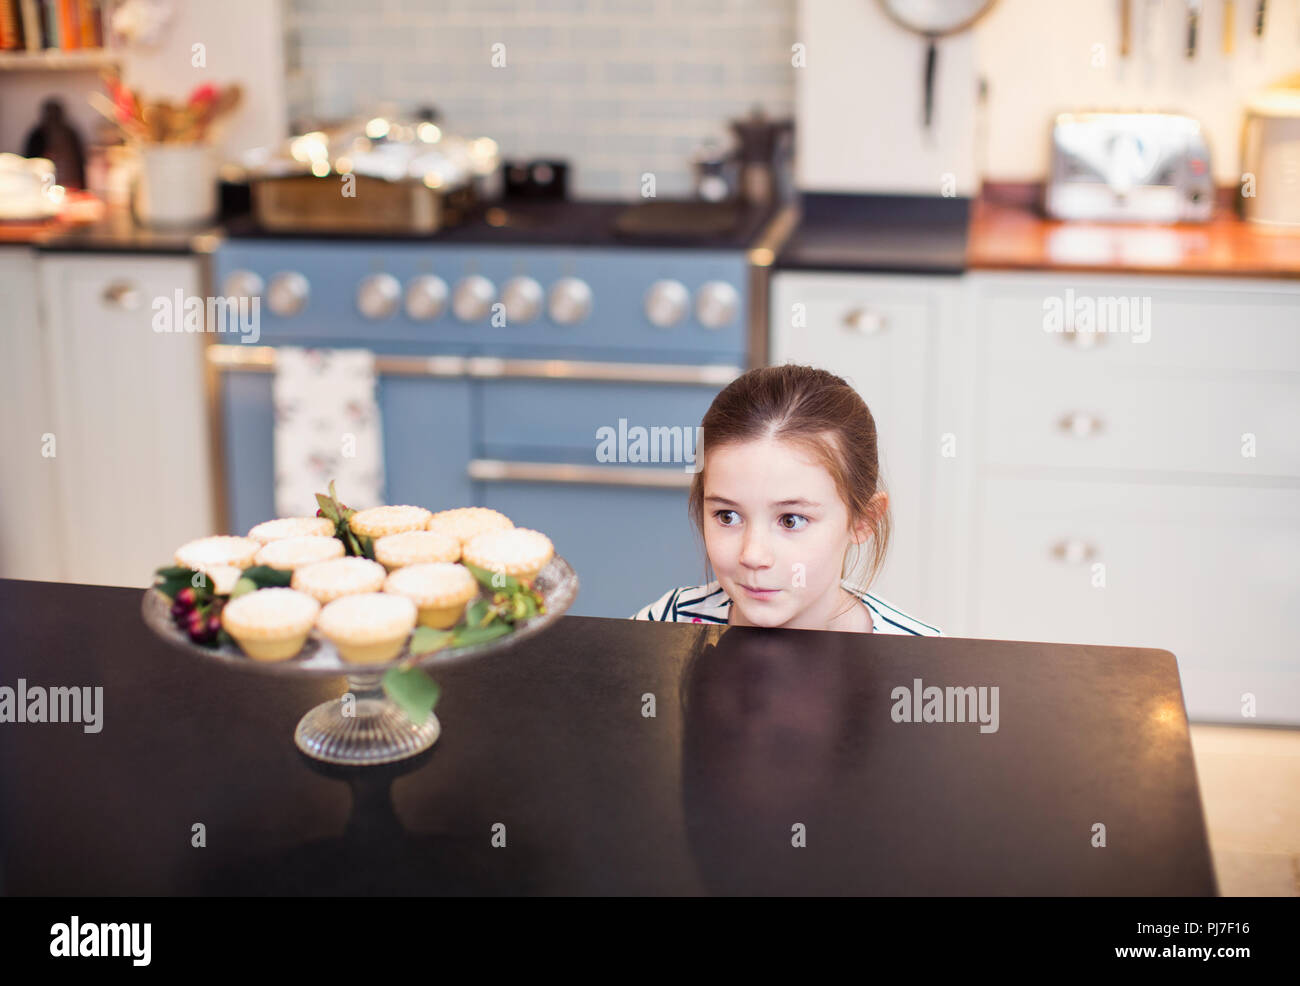 Cute girl eyeing Christmas pies on kitchen counter Stock Photo